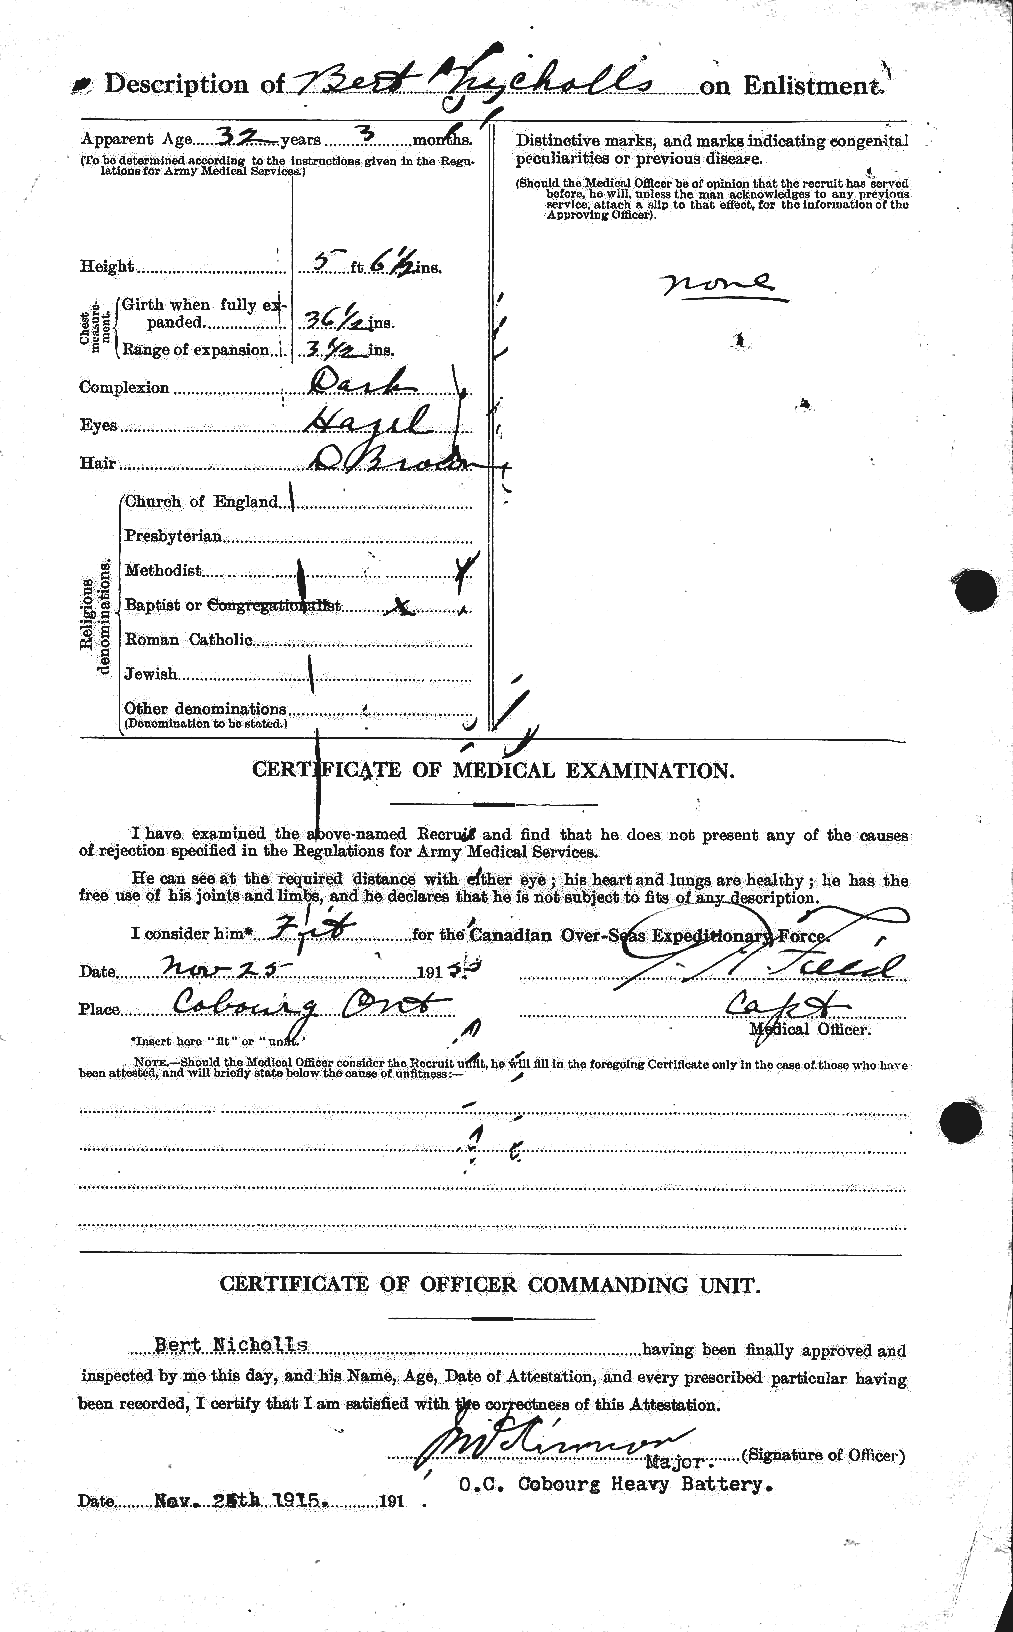 Personnel Records of the First World War - CEF 546414b